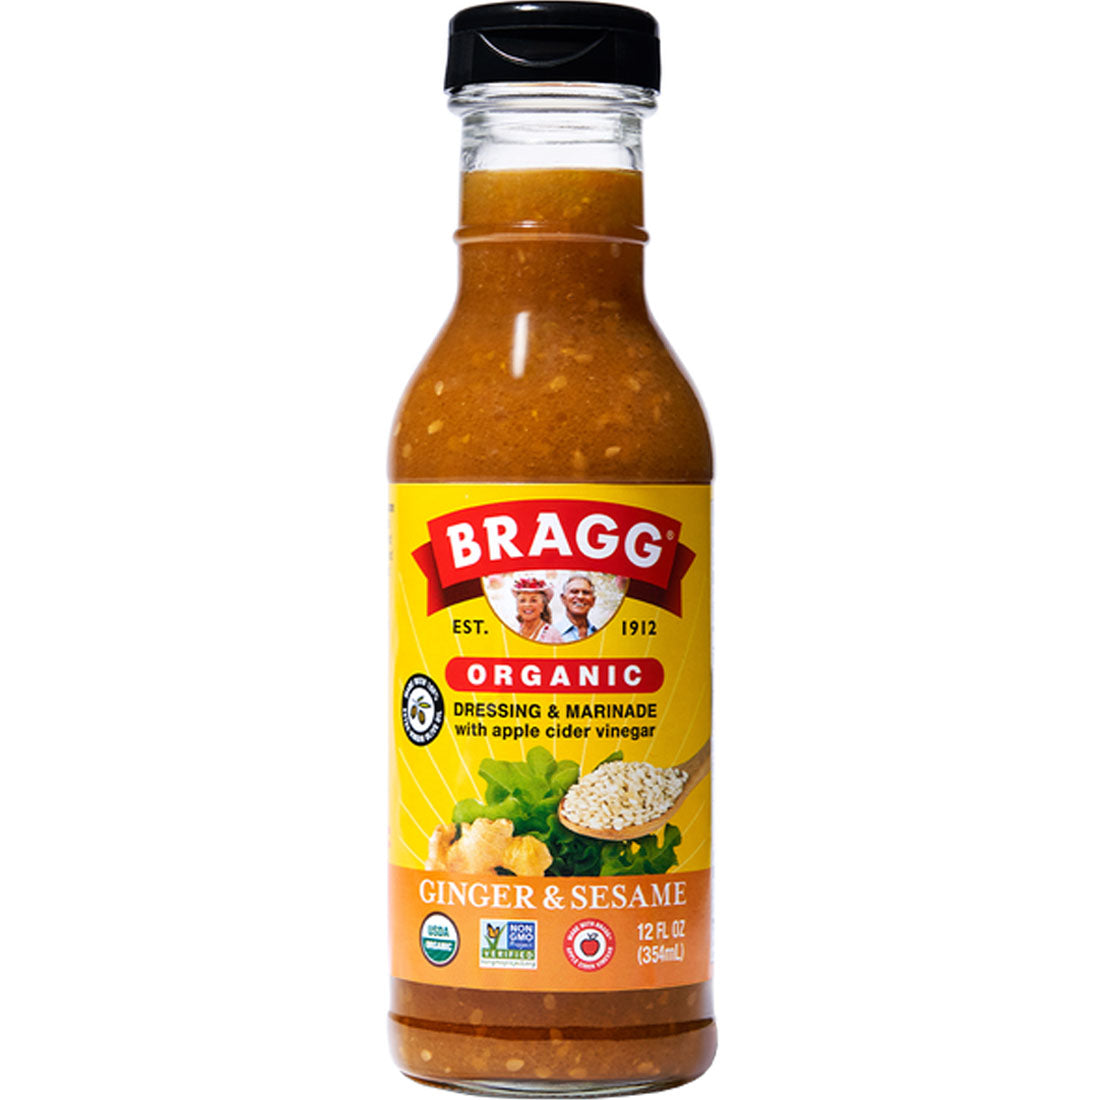 Bragg Ginger and Sesame (Factory Case), 6 x 354ml